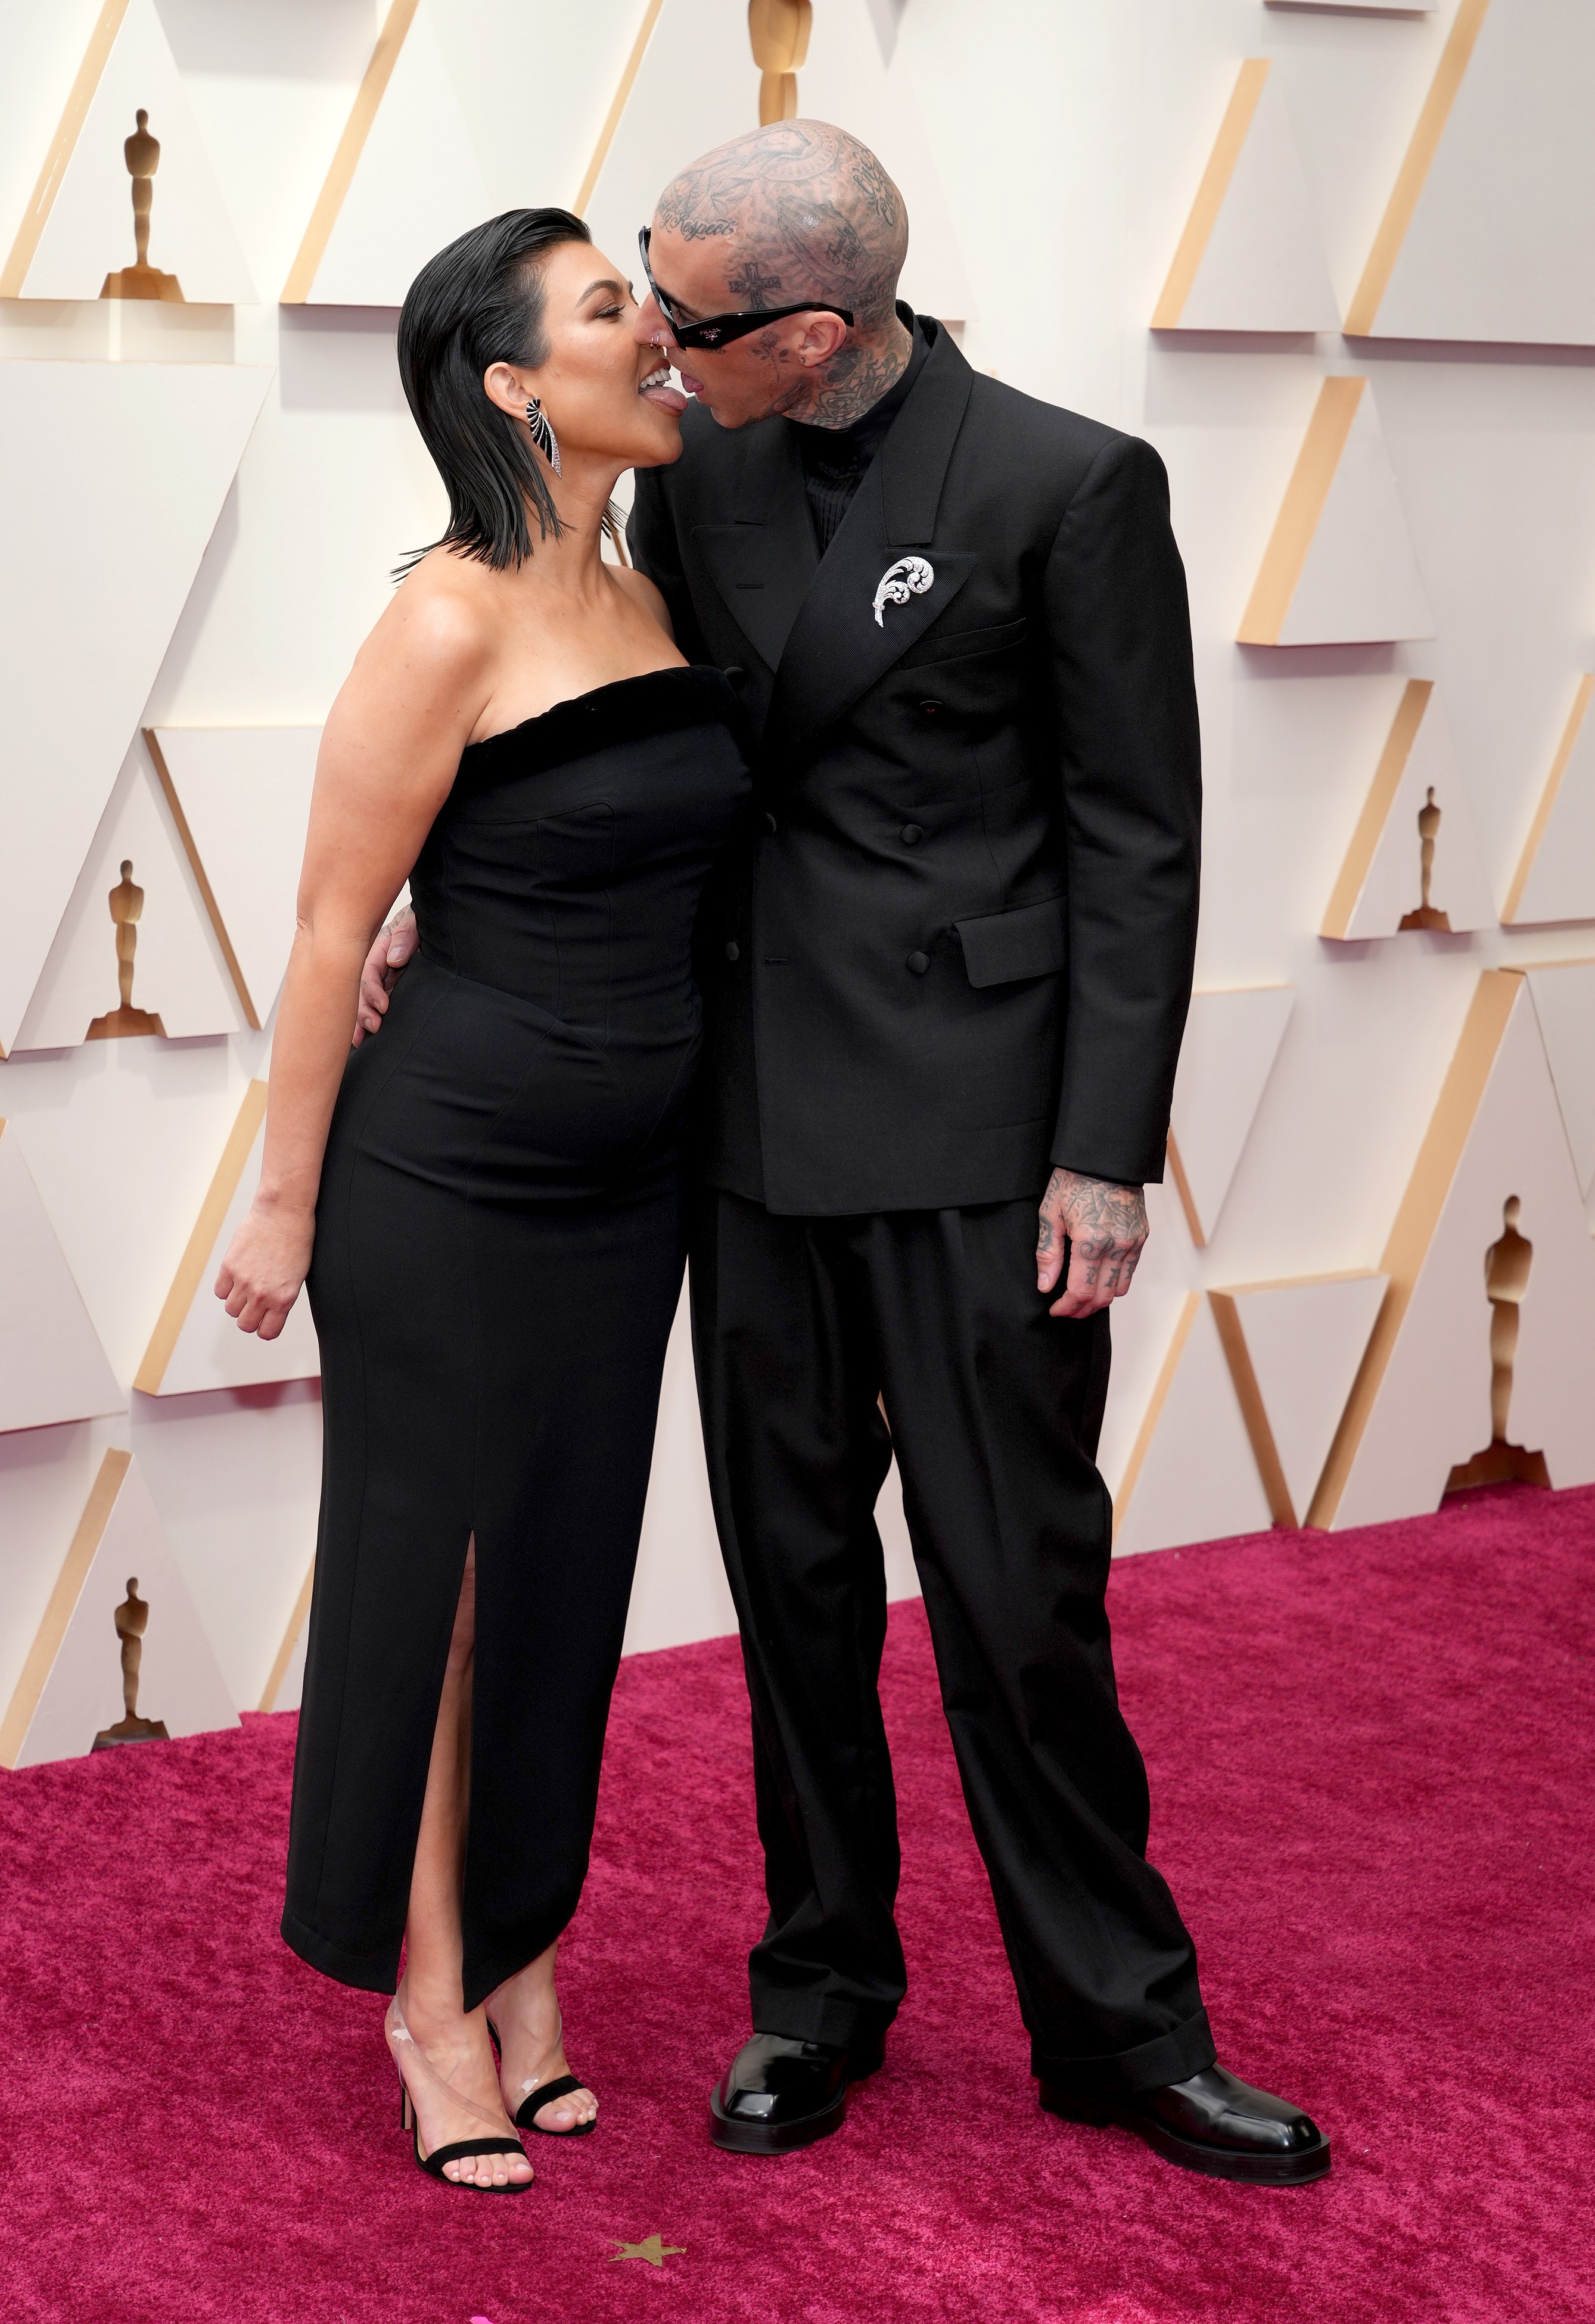 HOLLYWOOD, CALIFORNIA - MARCH 27: (L-R) Kourtney Kardashian and Travis Barker attend the 94th Annual Academy Awards at Hollywood and Highland on March 27, 2022 in Hollywood, California. (Photo by Kevin Mazur/WireImage) (Foto: WireImage,)